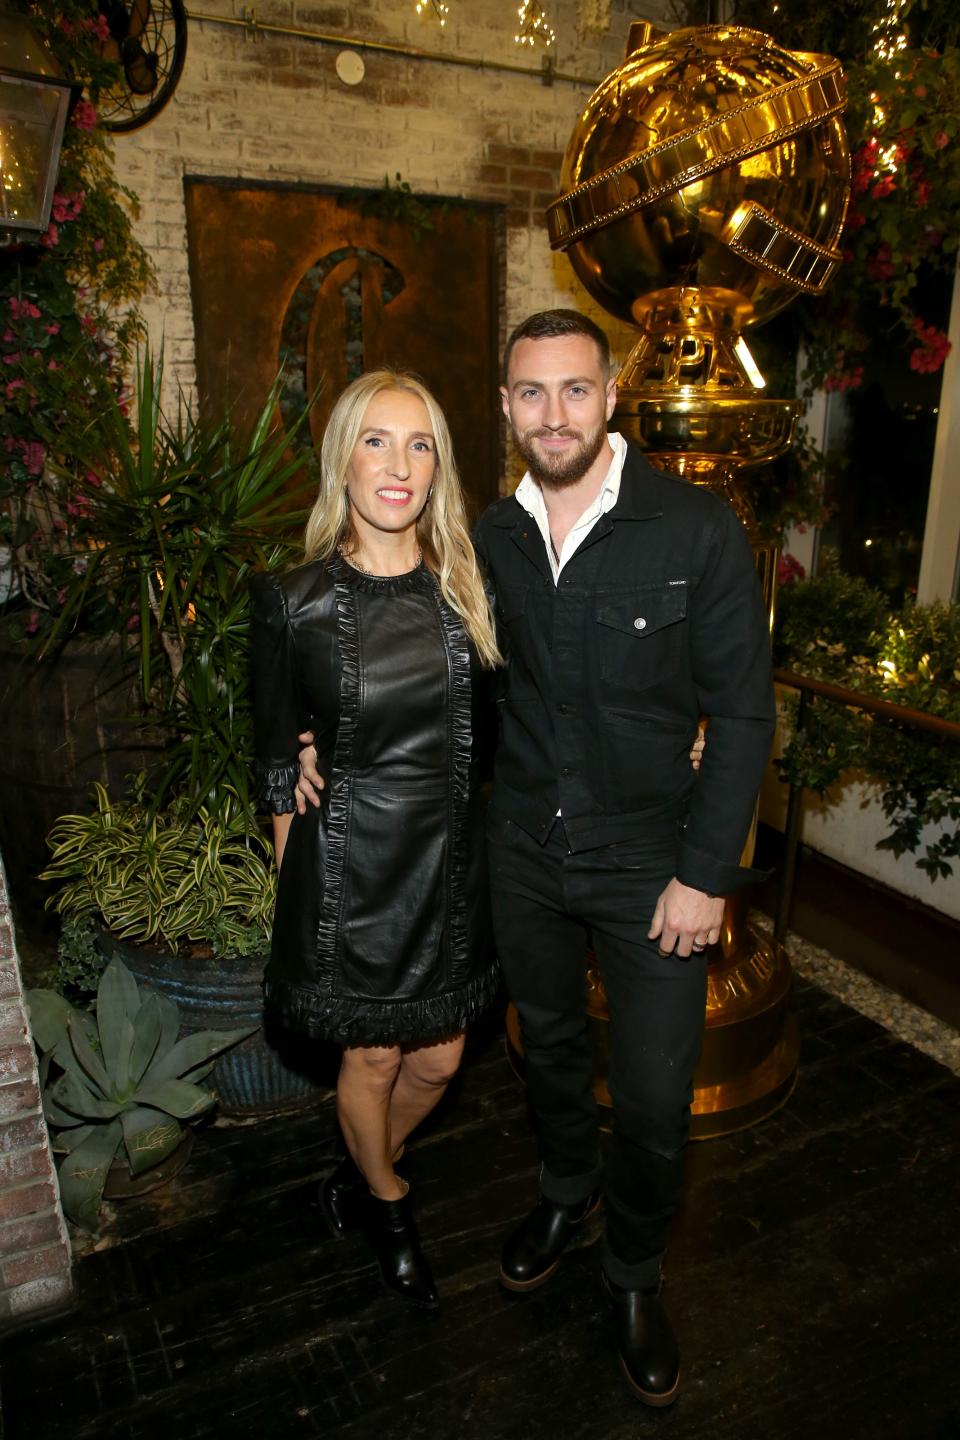 Sam Taylor-Johnson and Aaron Taylor-Johnson's age gap relationship has been widely critiqued over the years.